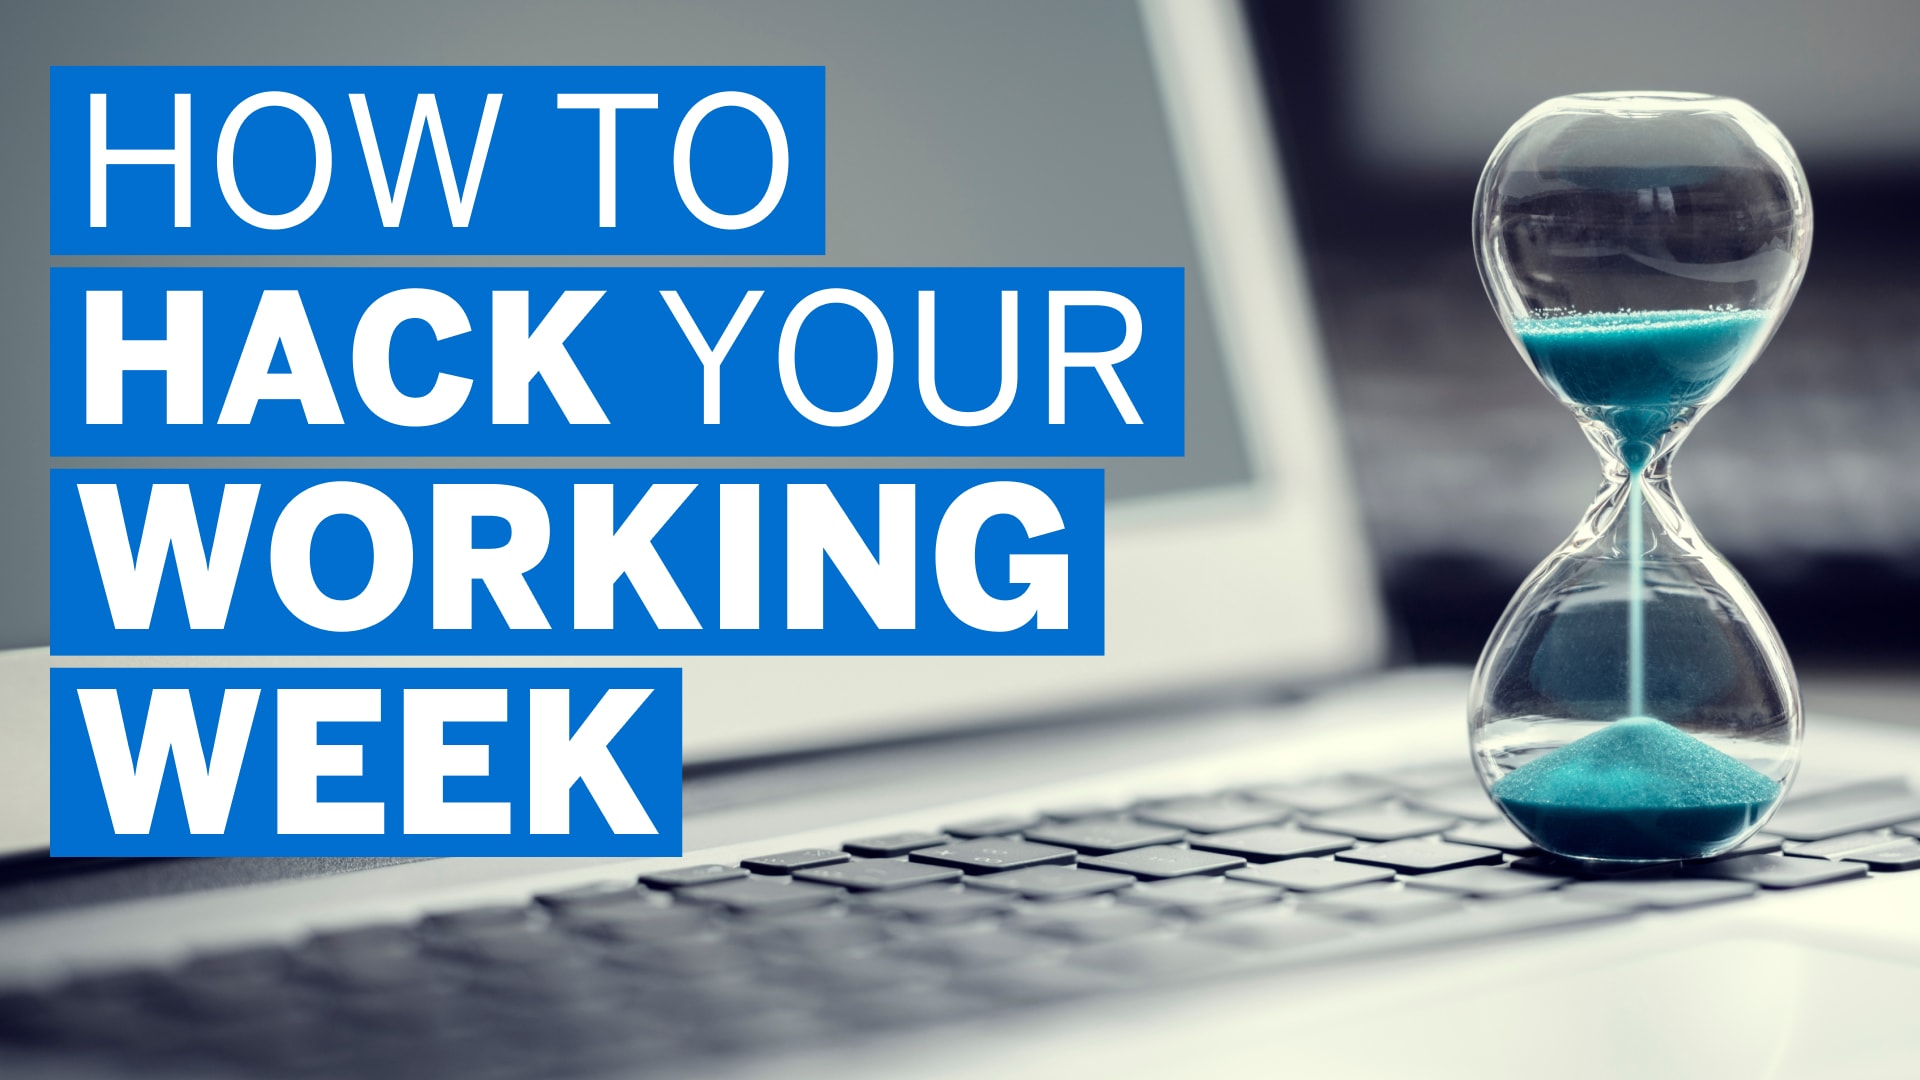 How to Hack Your Working Week